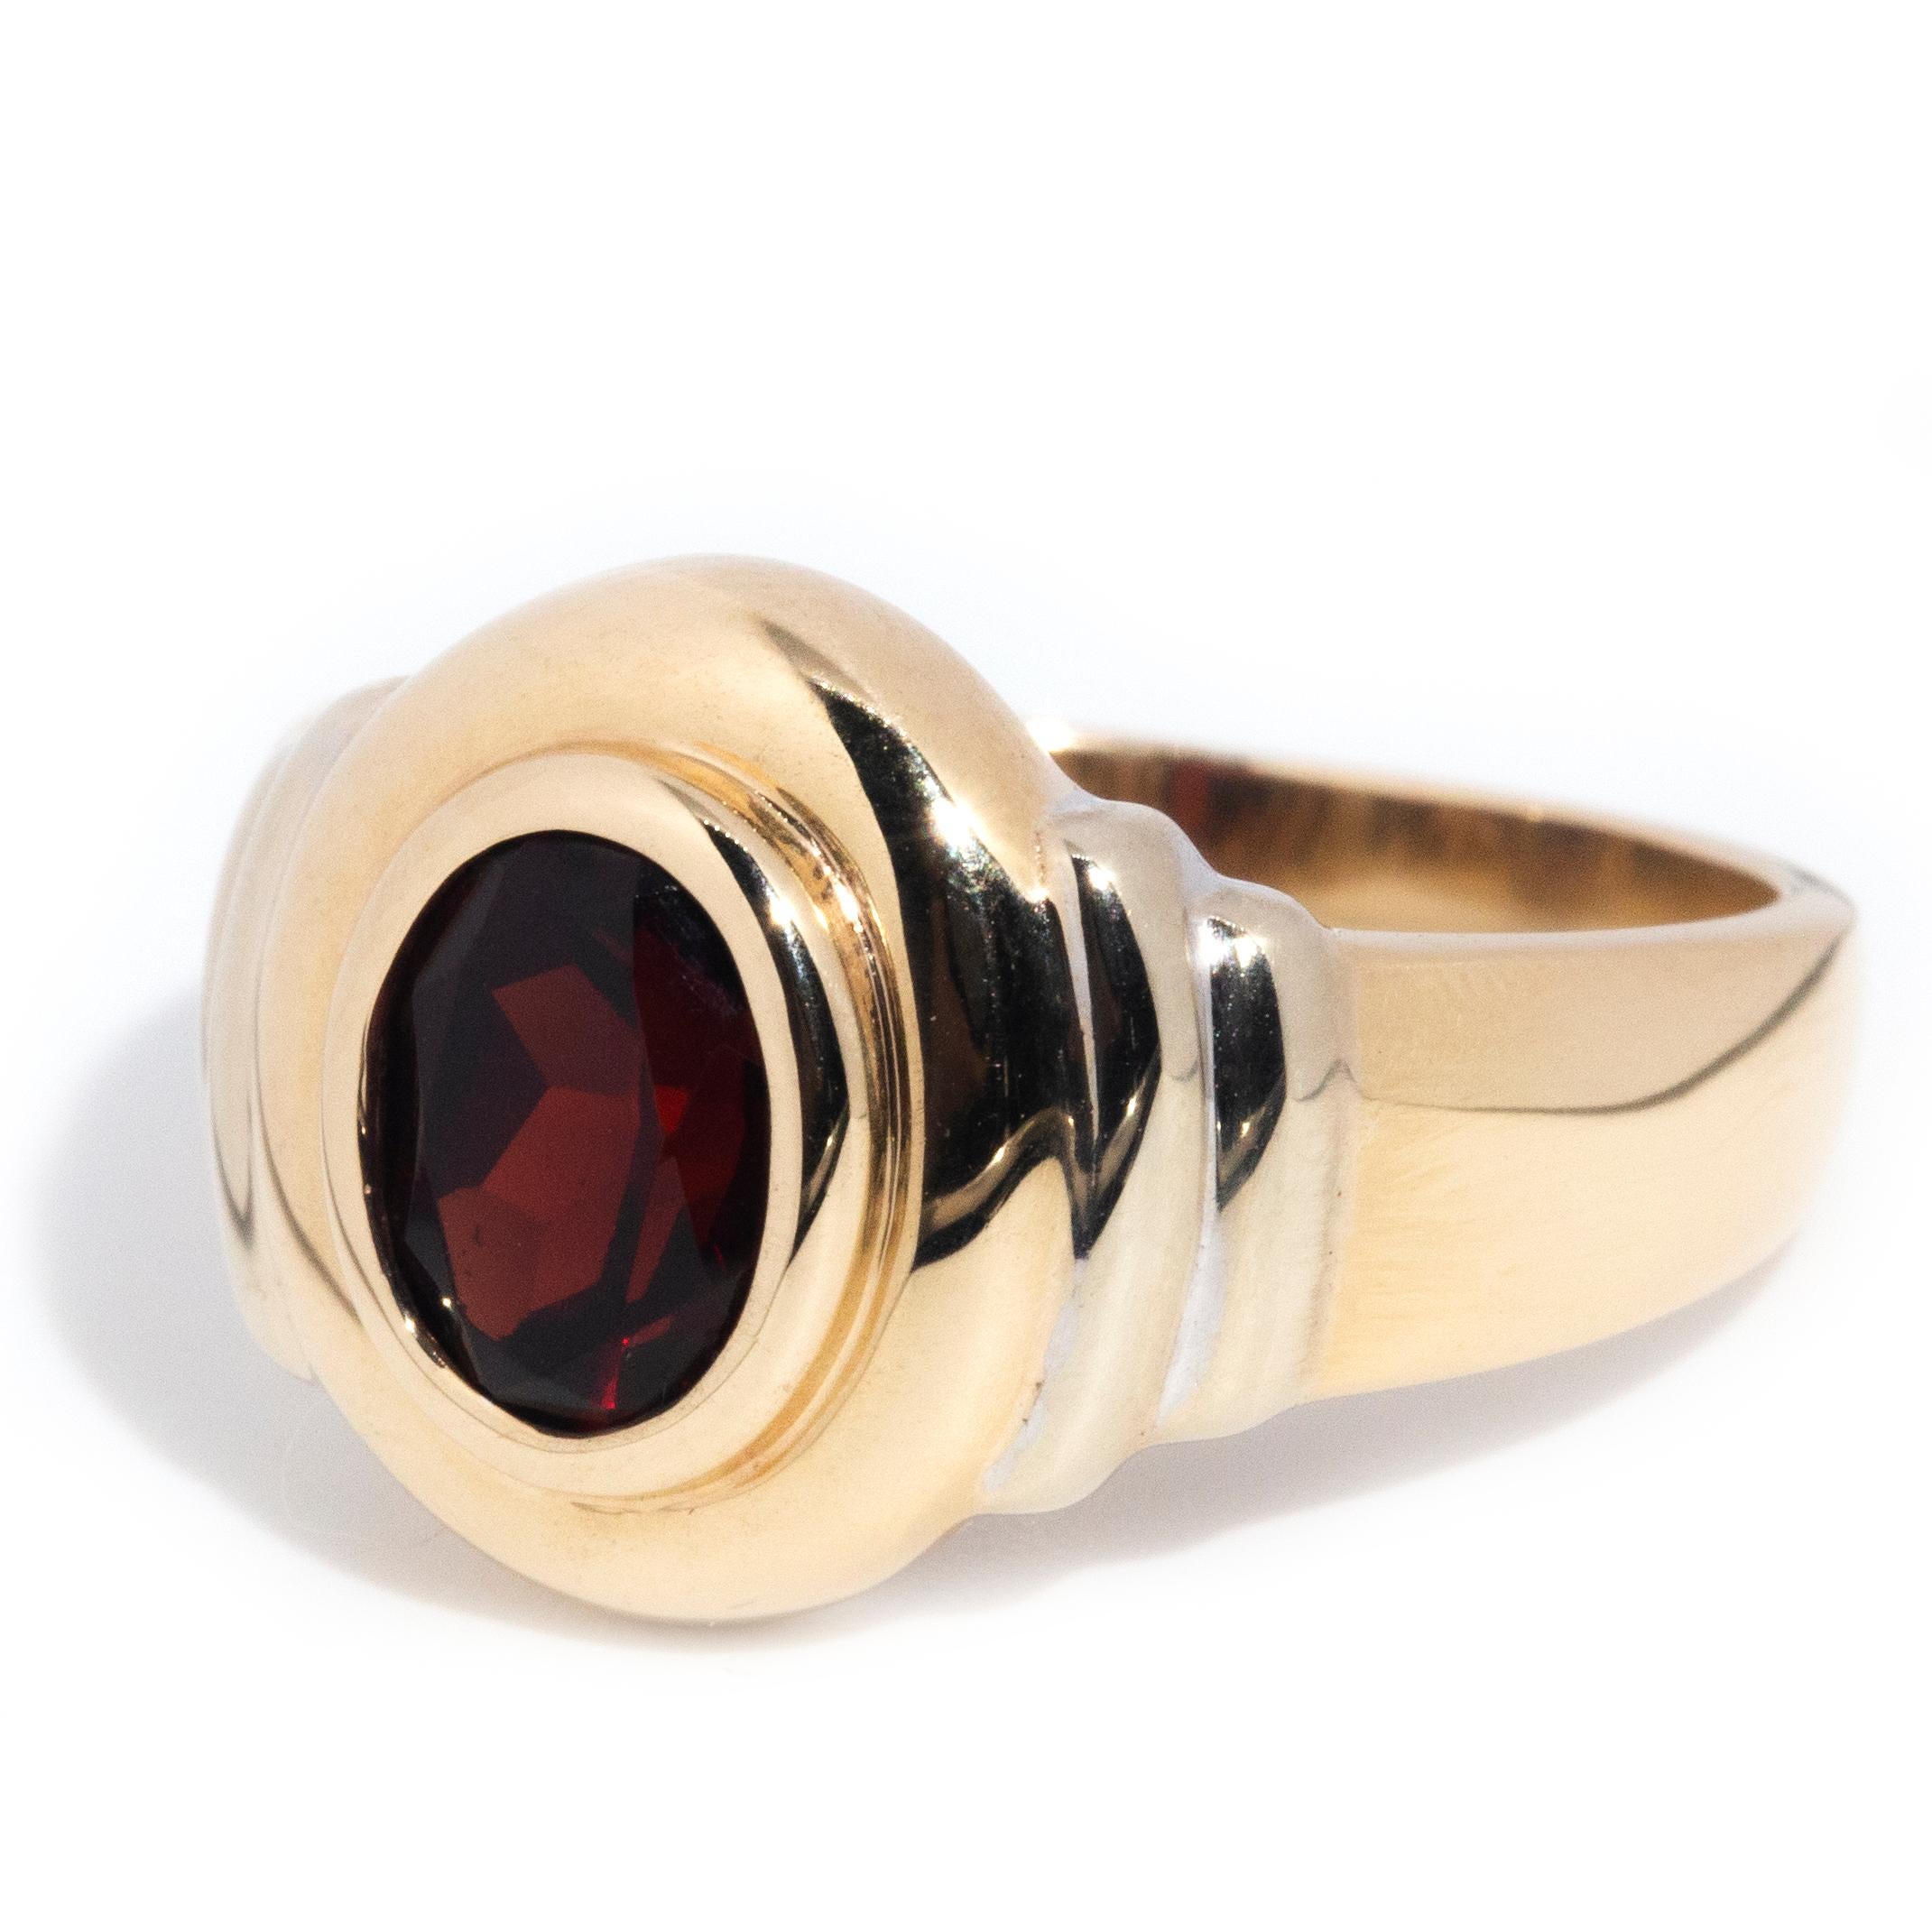 circa 1990s, Vintage 9 Carat Yellow Gold Double Rub over Oval Cut Garnet Ring In Good Condition For Sale In Hamilton, AU